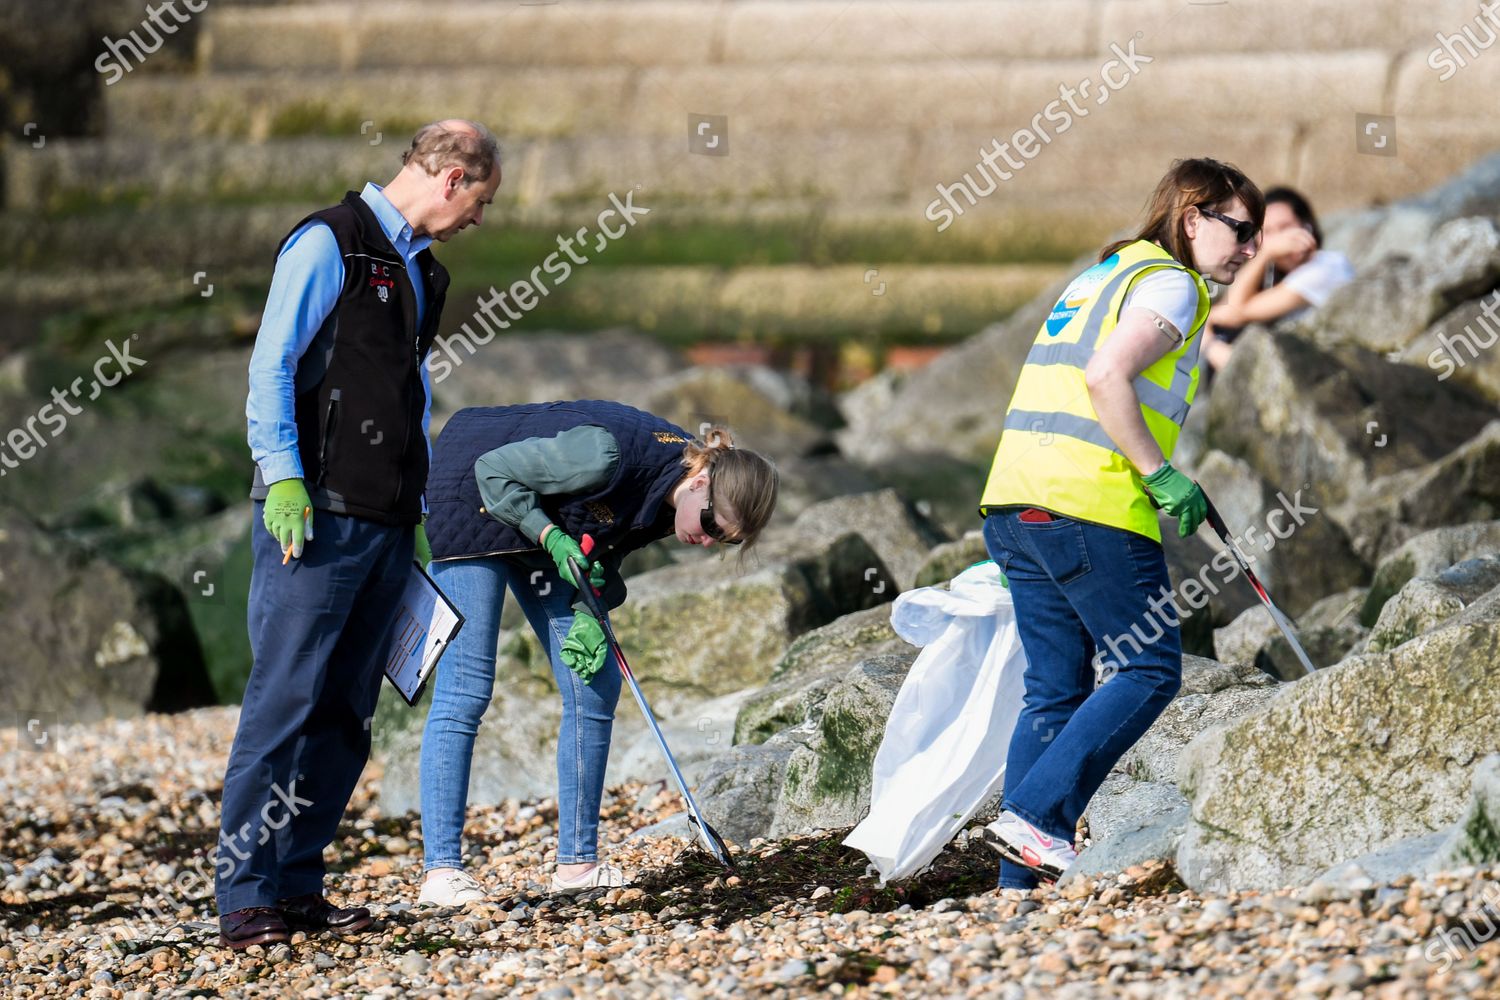 prince-edward-and-sophie-countess-of-wessex-great-british-beach-clean-southsea-beach-portsmouth-uk-shutterstock-editorial-10782998t.jpg